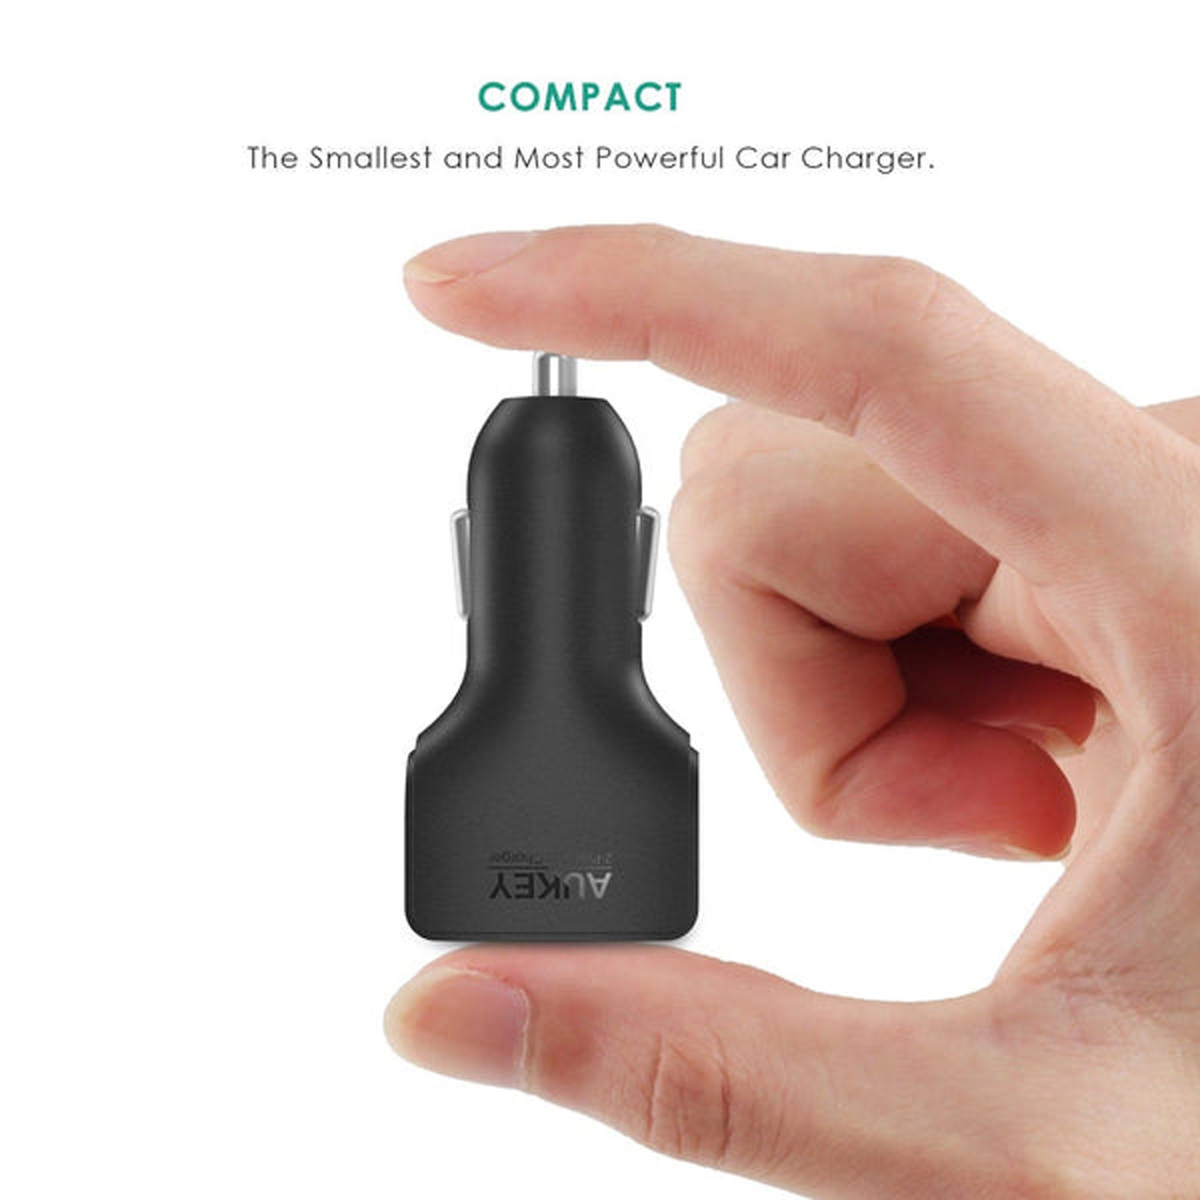 Aukey CC-S3 24W 4.8A Compact Dual Port Car Charger with AiPower, Black